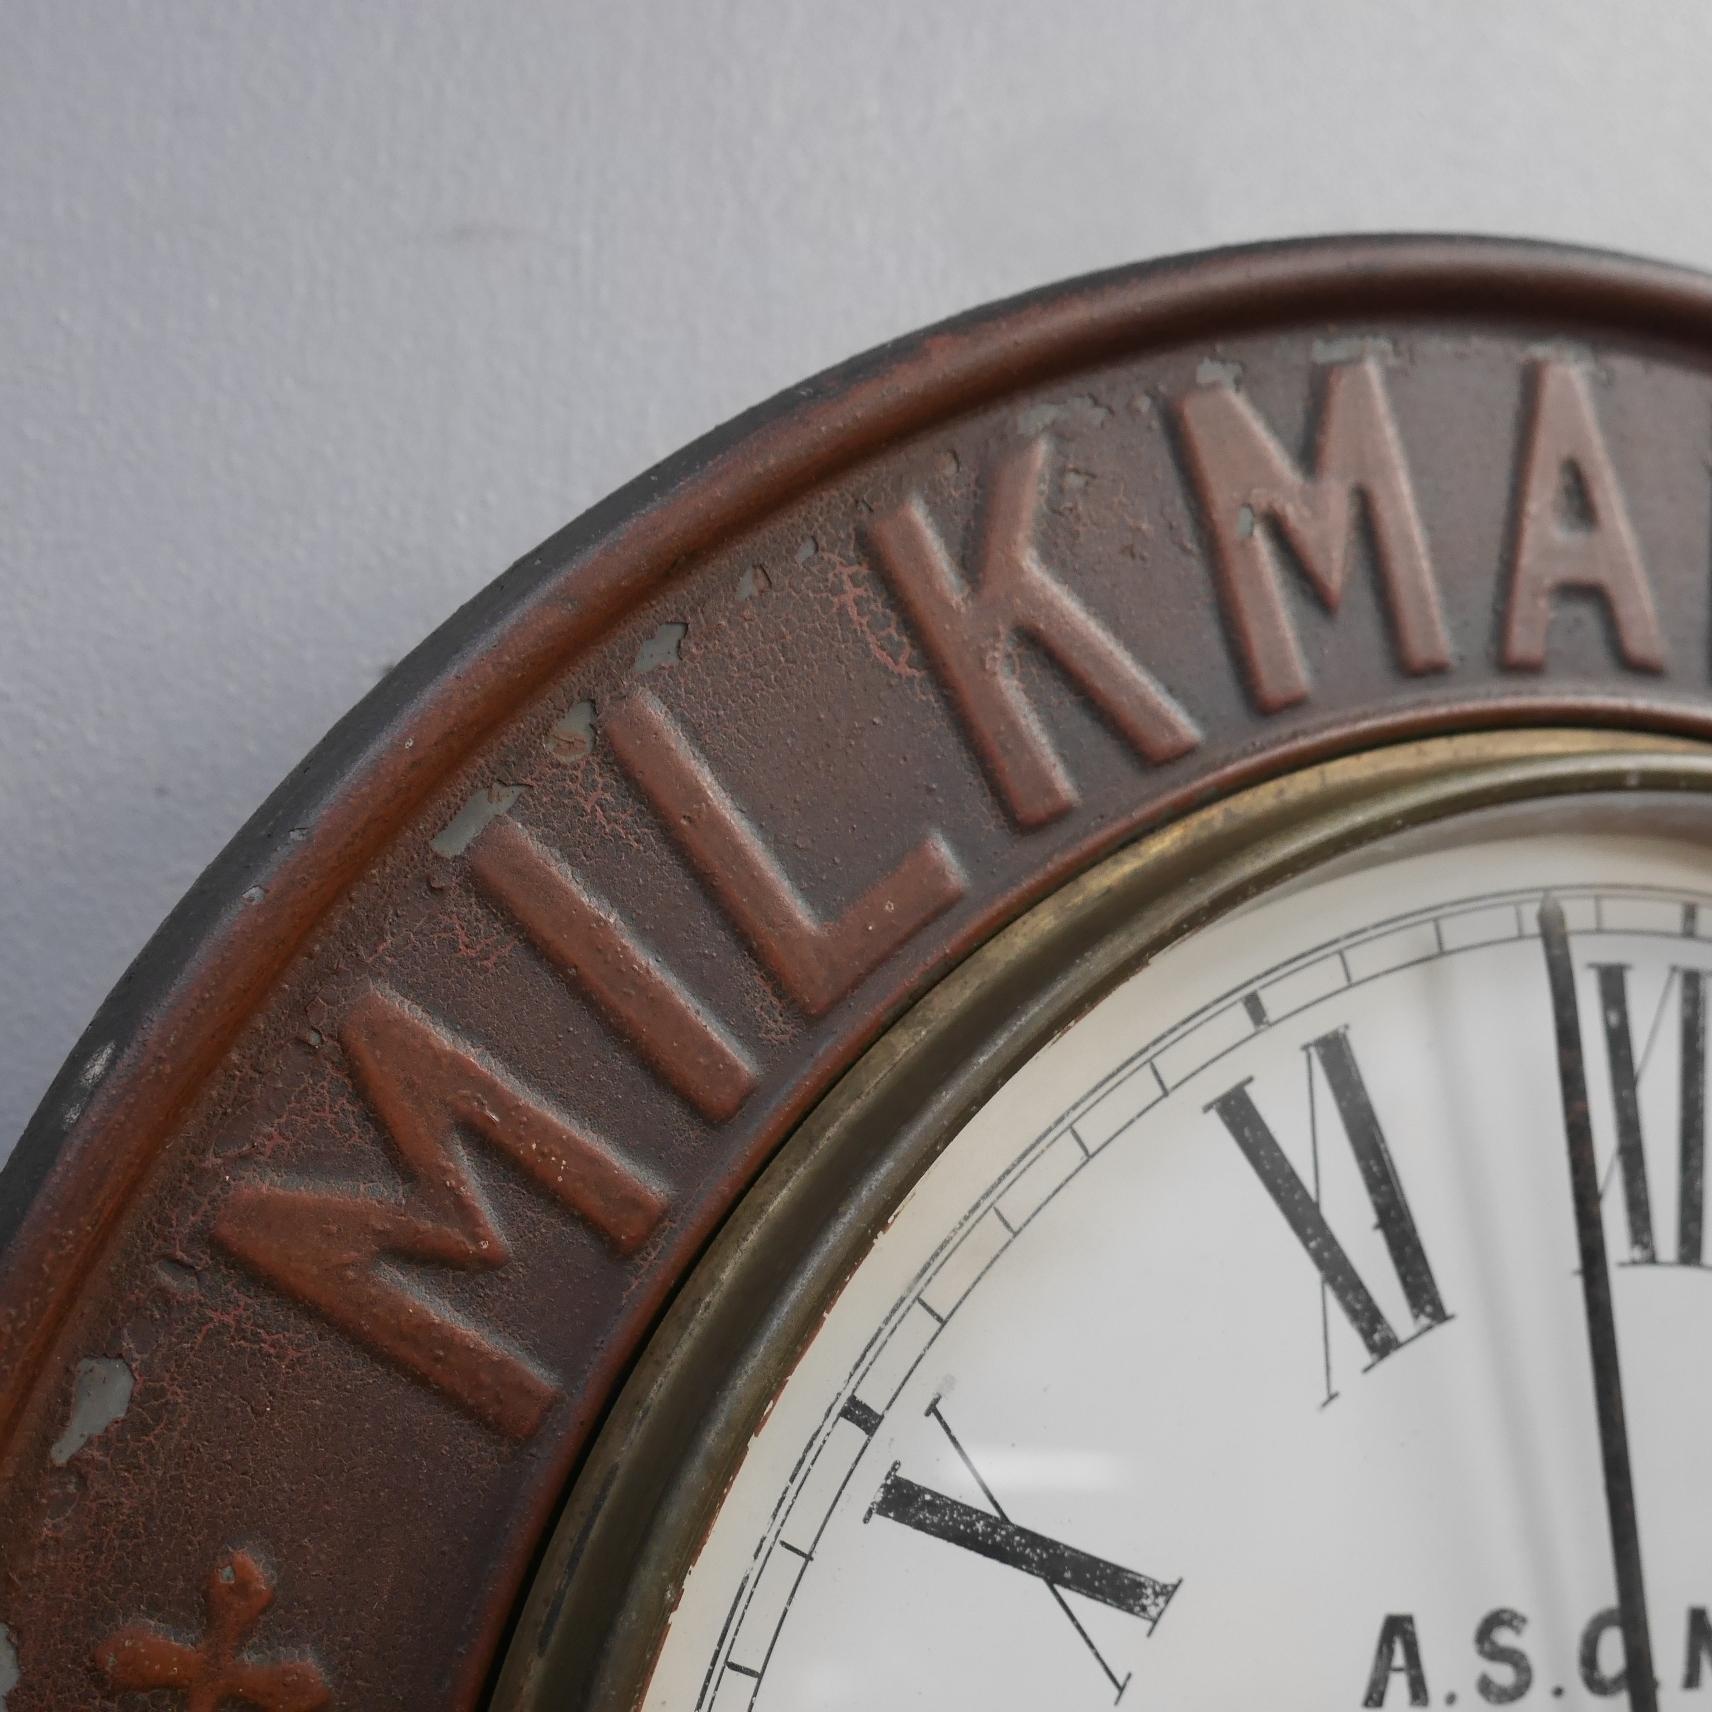 An early English grocer's advertising clock for Milkmaid Milk.
A superb & highly original antique advertising clock, the timber carcass with a pressed tin / zinc surround, finished in original paint. With wonderful age related patina & original